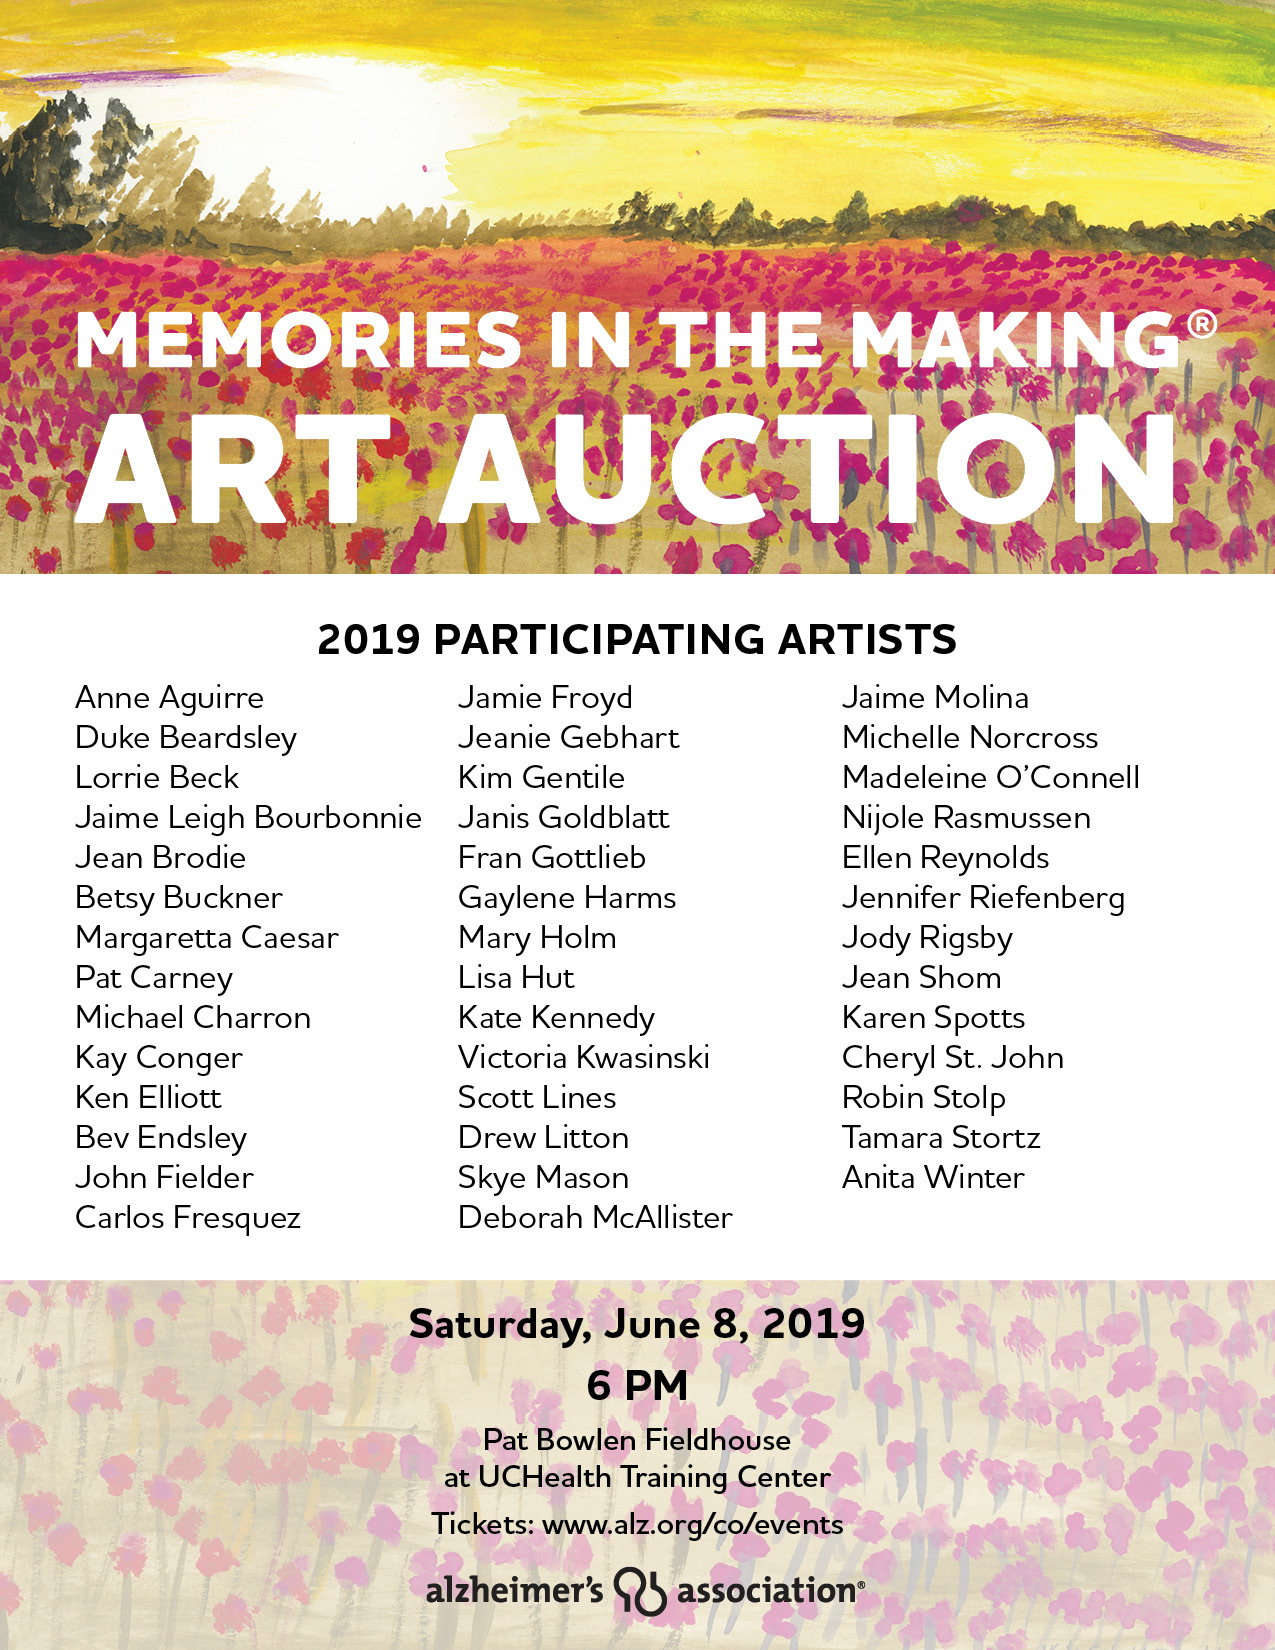 Memories in the Making Art Auction